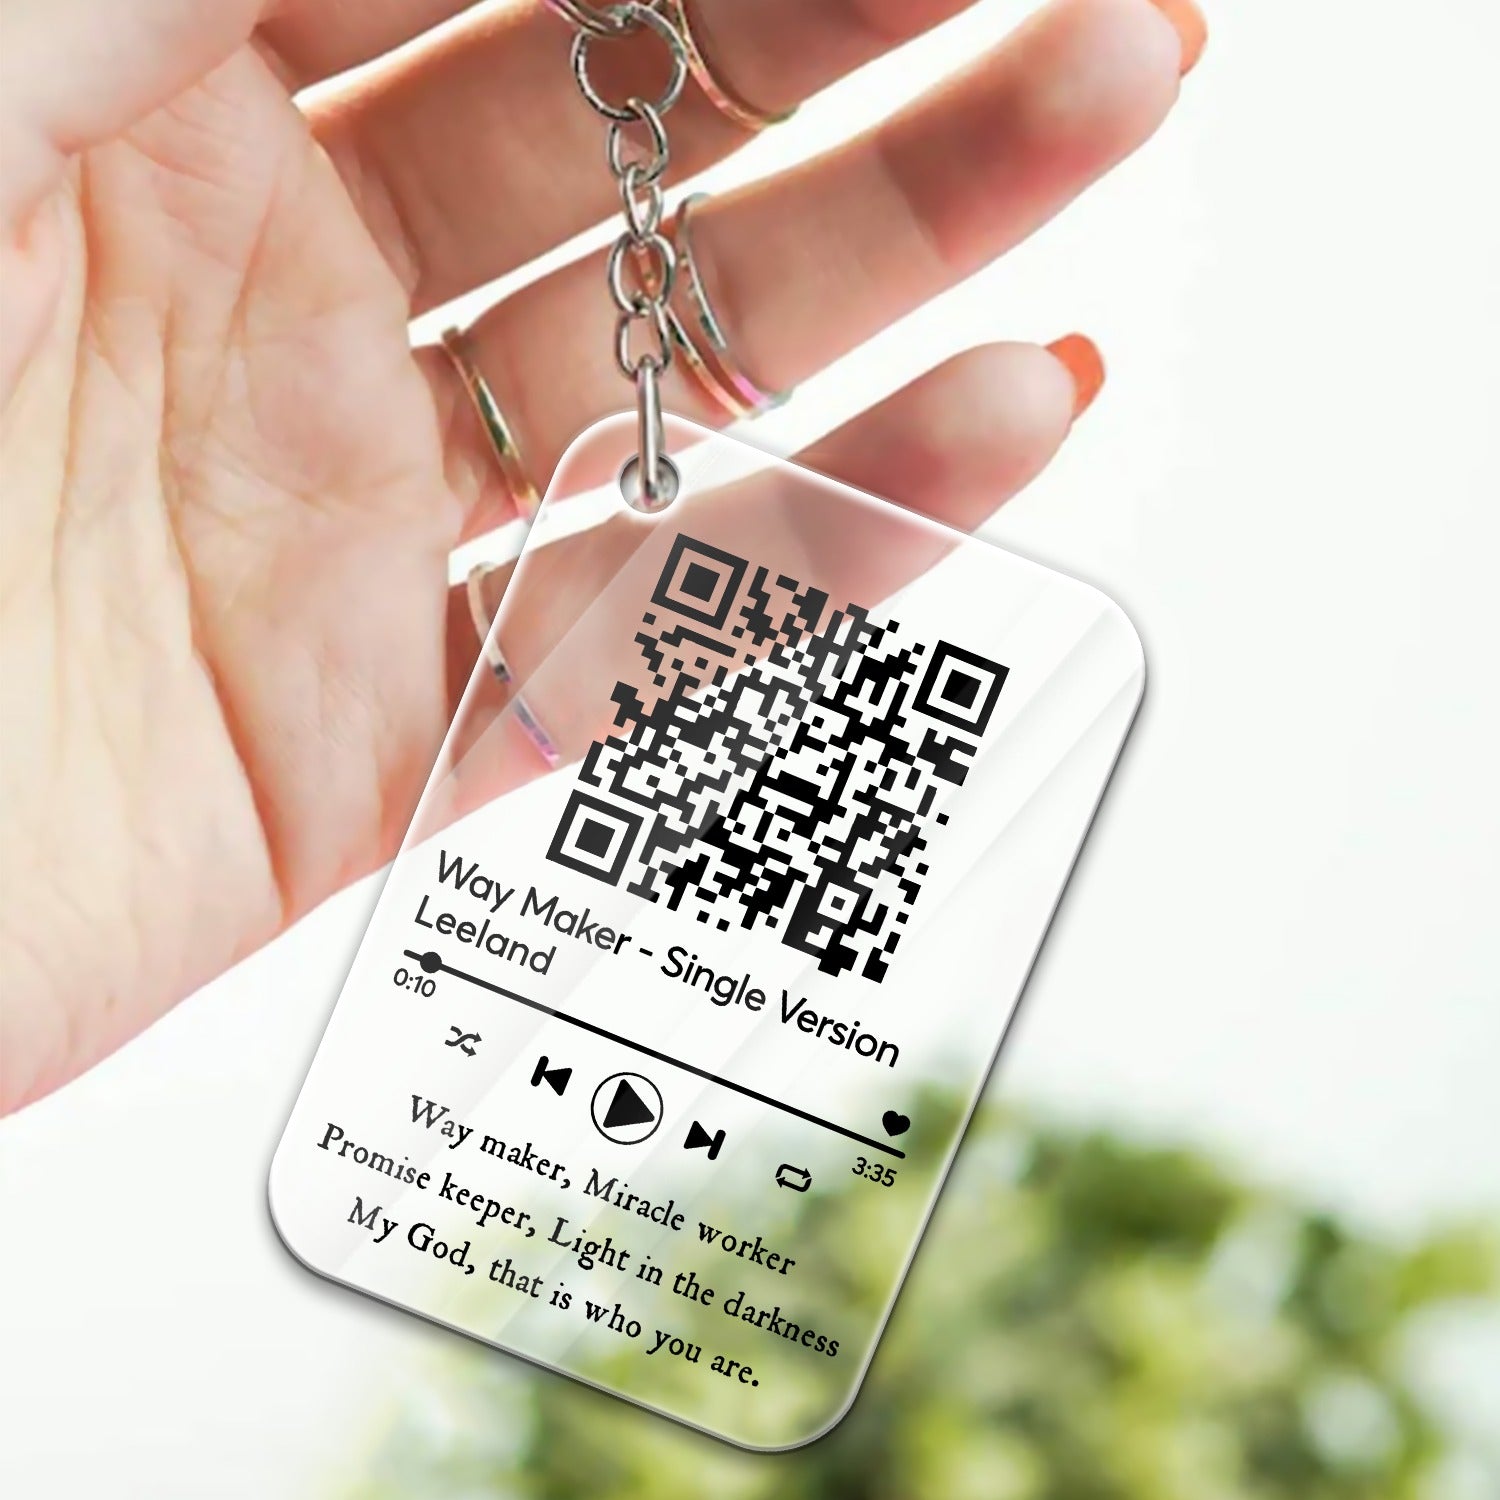 Way Maker Song Scannable QR Code On Spotify Acrylic Keychain